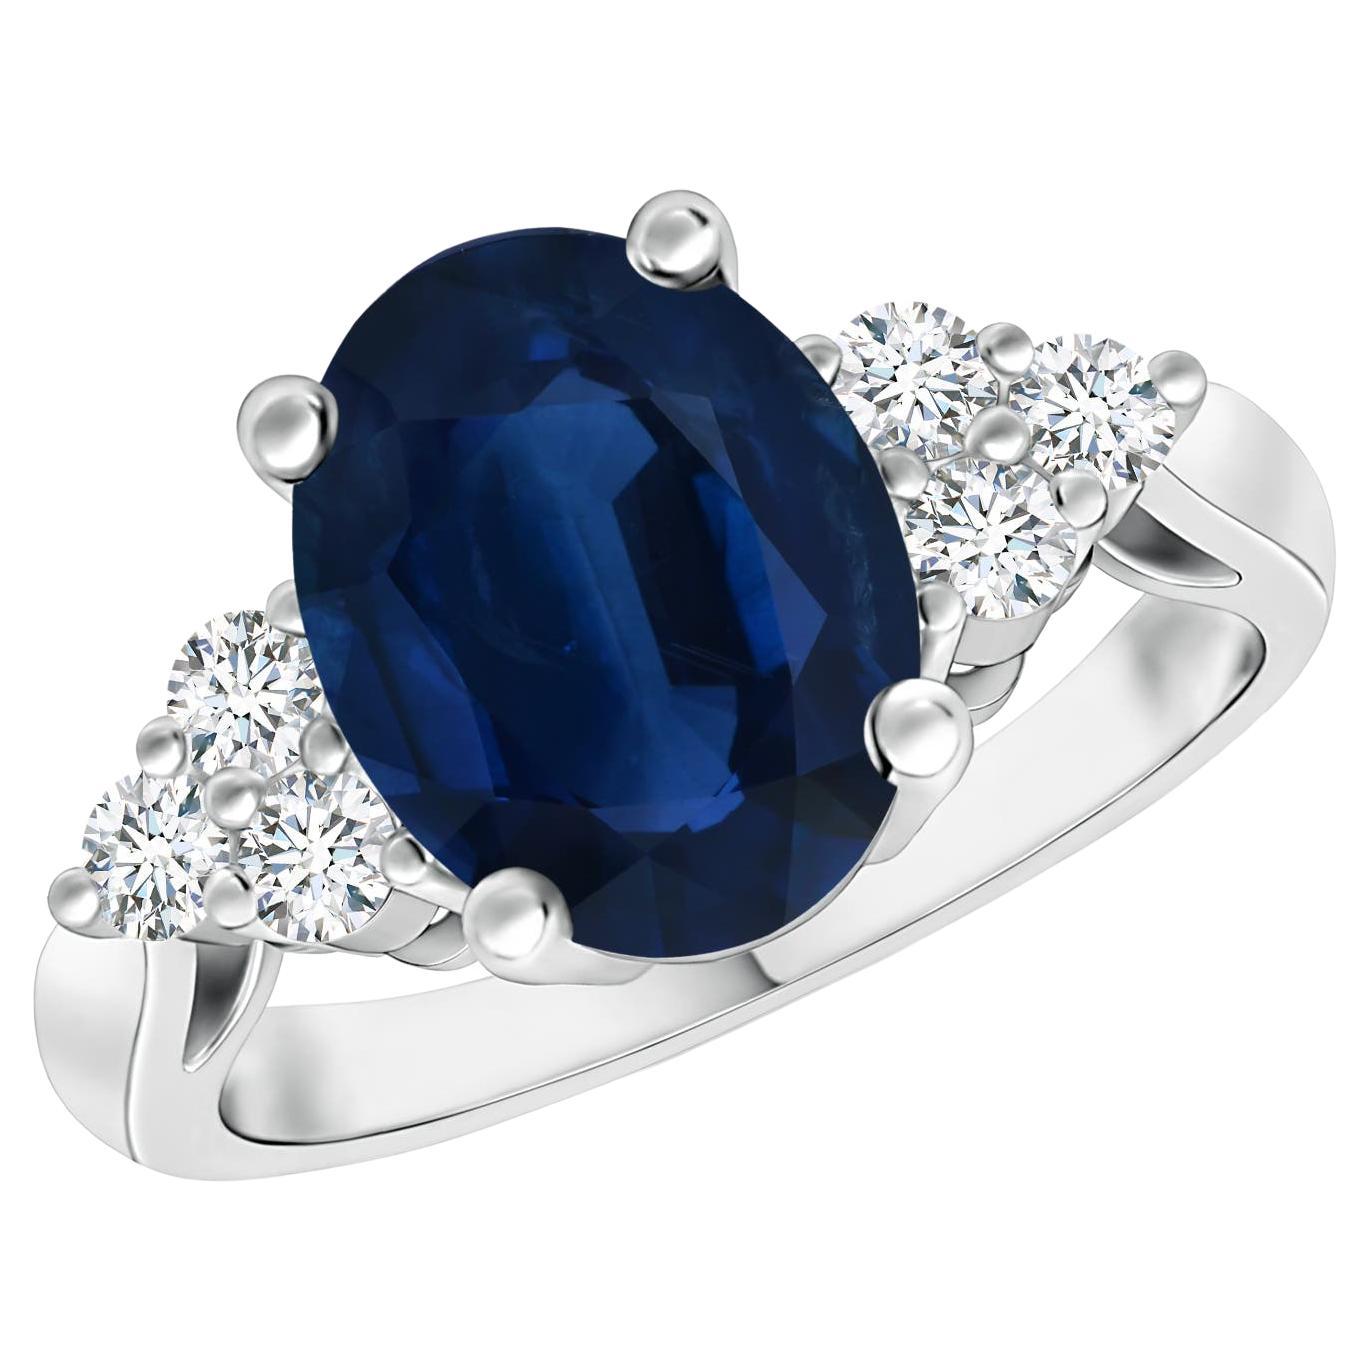 For Sale:  GIA Certified Natural Blue Sapphire Ring in White Gold with Trio Diamonds